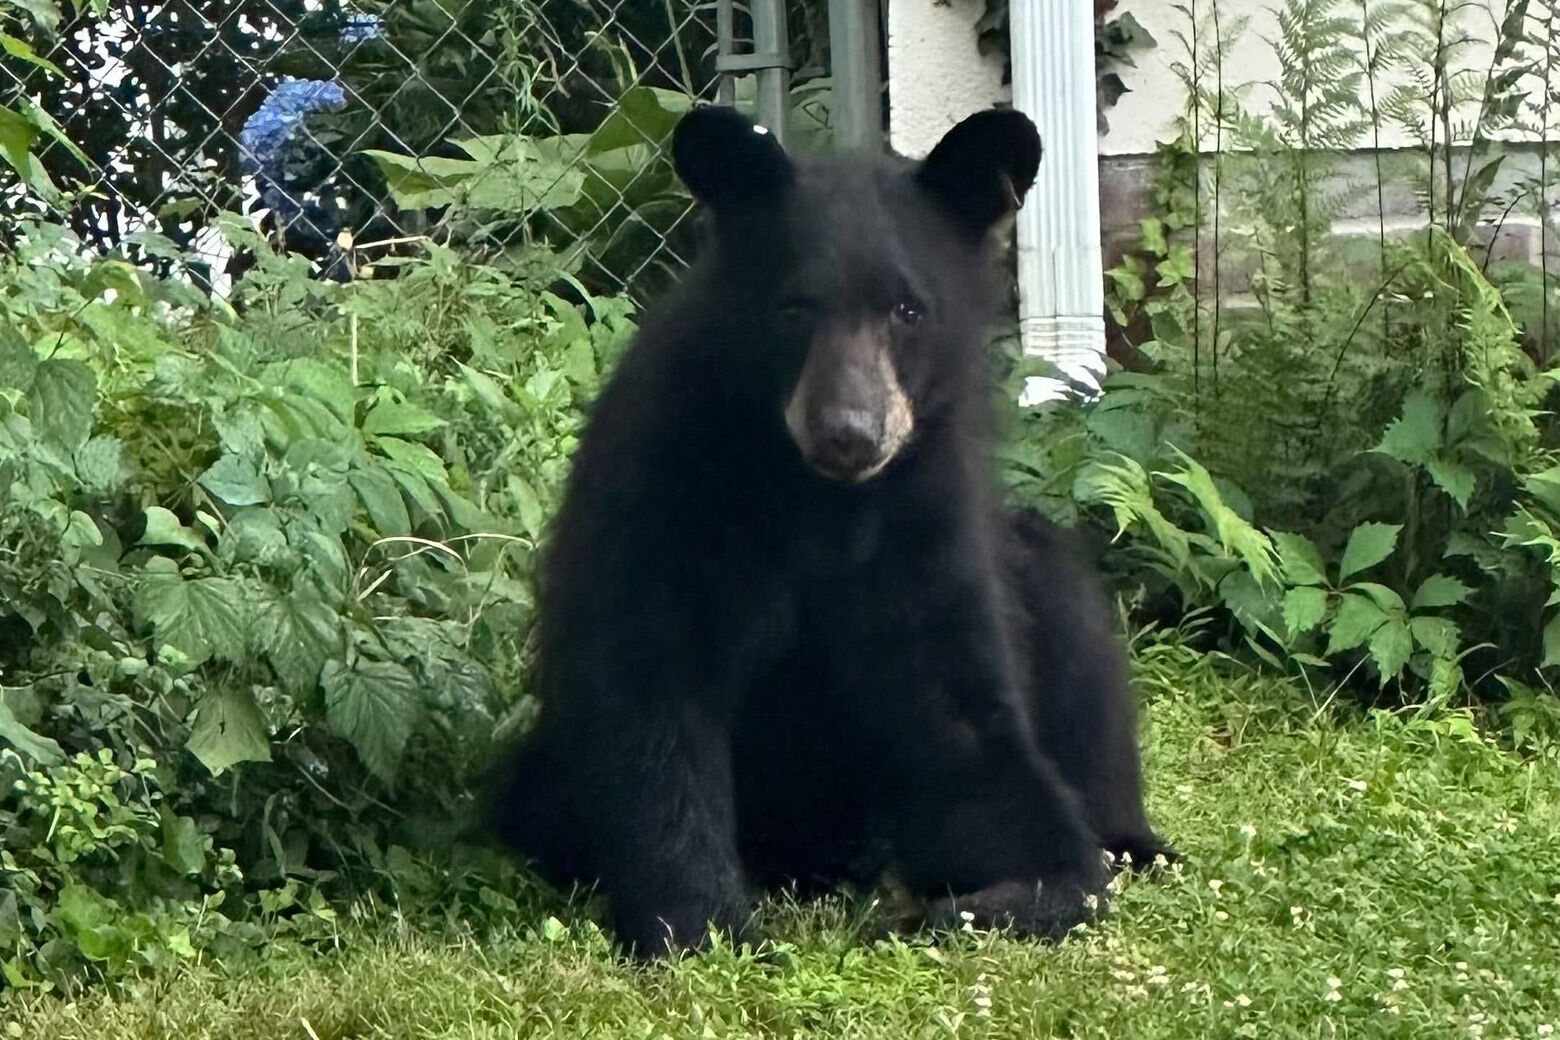 A young black bear has been spotted roaming suburban backyards in part of Arlington County, Virginia, over the past few days, officials said. 